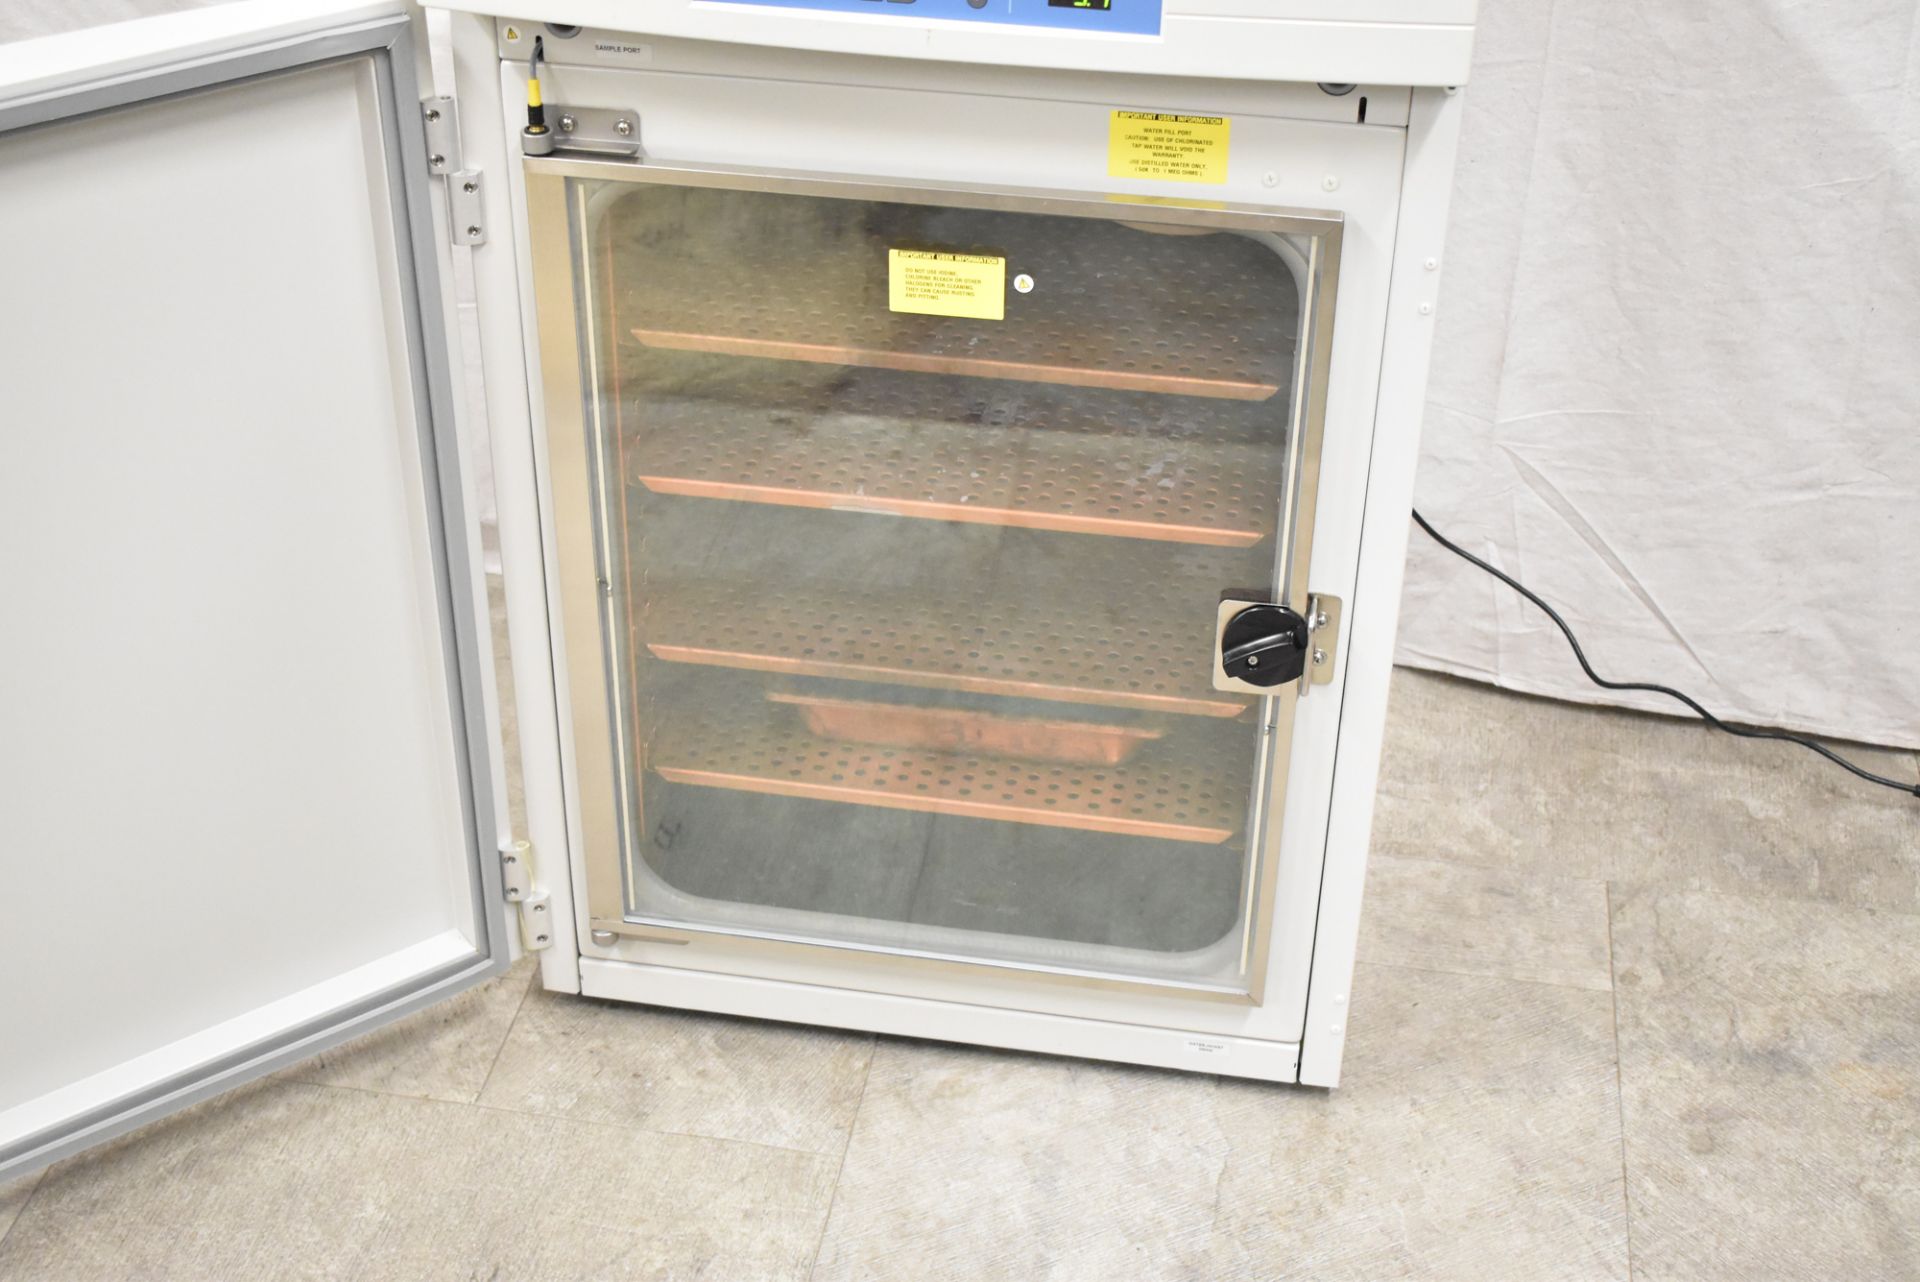 THERMO SCIENTIFIC 3130 FORMA SERIES II WATER JACKET CO2 INCUBATOR WITH DIGITAL MICROPROCESSOR - Image 6 of 8